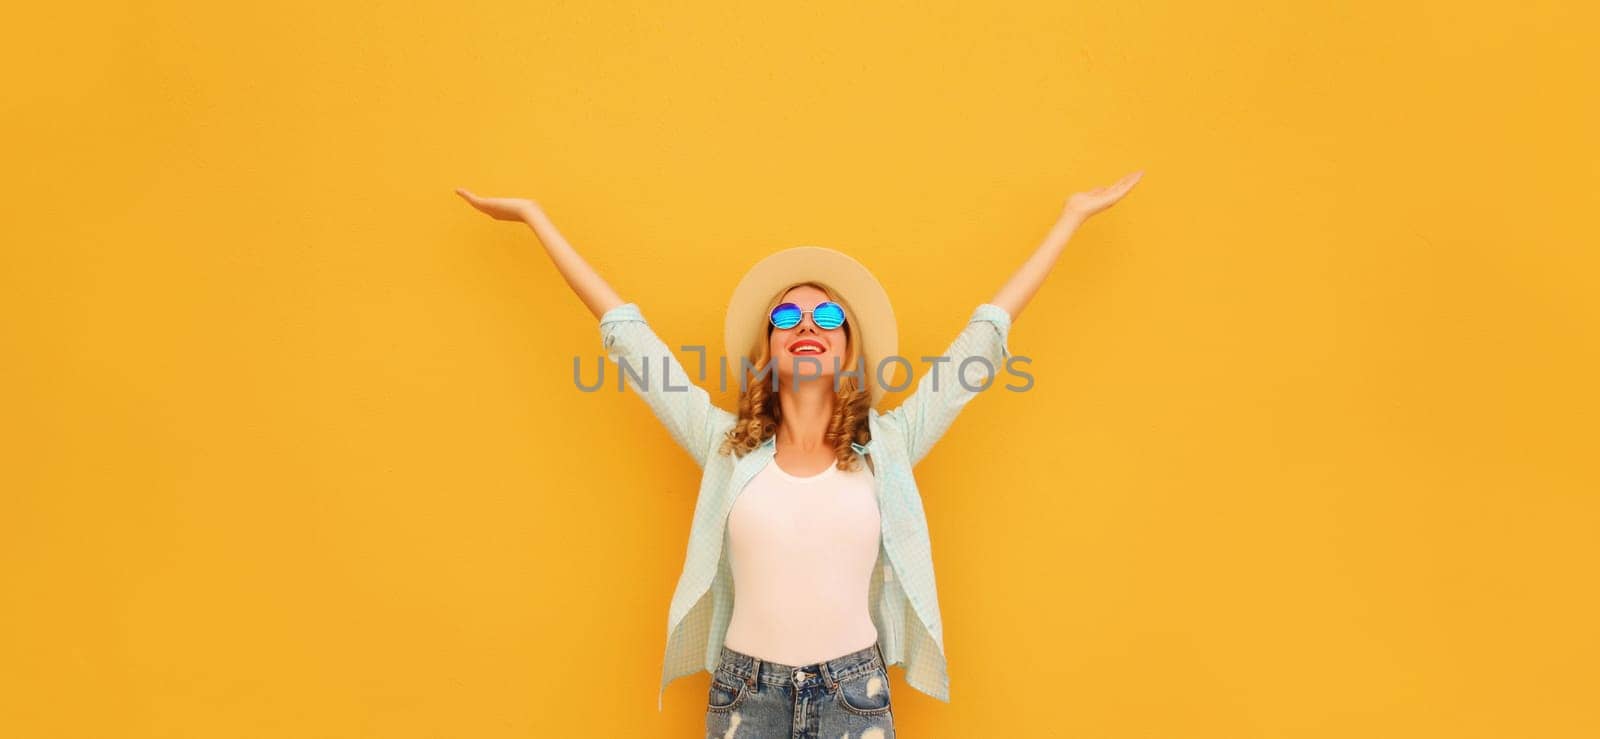 Summer holidays, inspired happy cheerful smiling young woman raising her hands up wearing denim clothing, straw hat on colorful yellow background